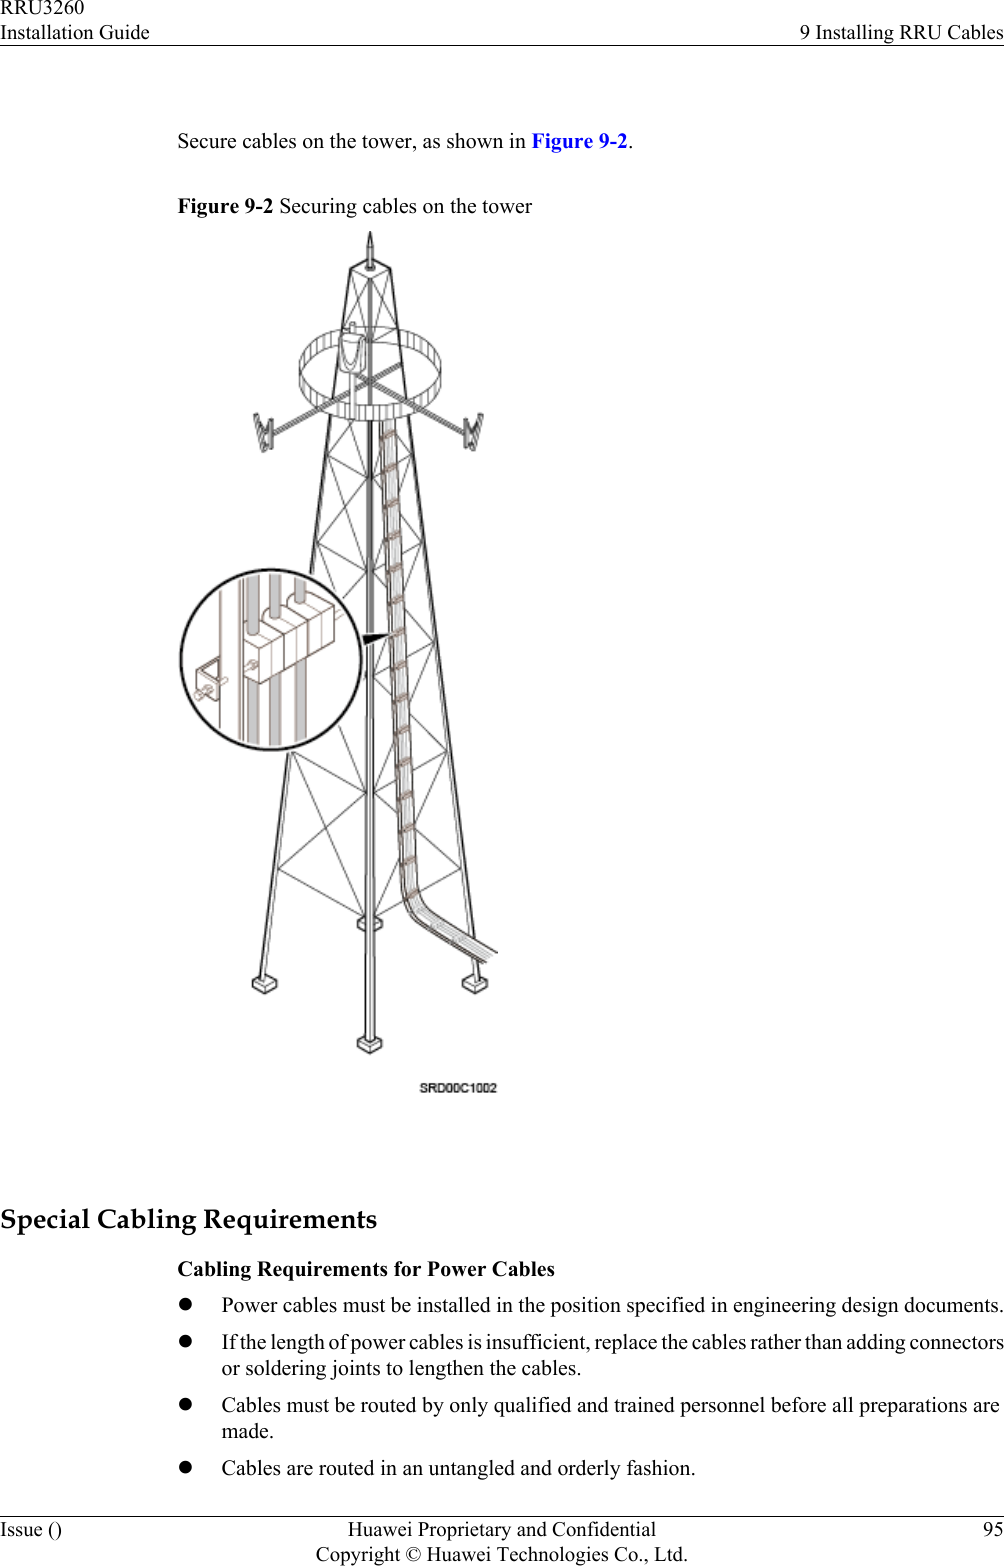  Secure cables on the tower, as shown in Figure 9-2.Figure 9-2 Securing cables on the tower Special Cabling RequirementsCabling Requirements for Power CableslPower cables must be installed in the position specified in engineering design documents.lIf the length of power cables is insufficient, replace the cables rather than adding connectorsor soldering joints to lengthen the cables.lCables must be routed by only qualified and trained personnel before all preparations aremade.lCables are routed in an untangled and orderly fashion.RRU3260Installation Guide 9 Installing RRU CablesIssue () Huawei Proprietary and ConfidentialCopyright © Huawei Technologies Co., Ltd.95